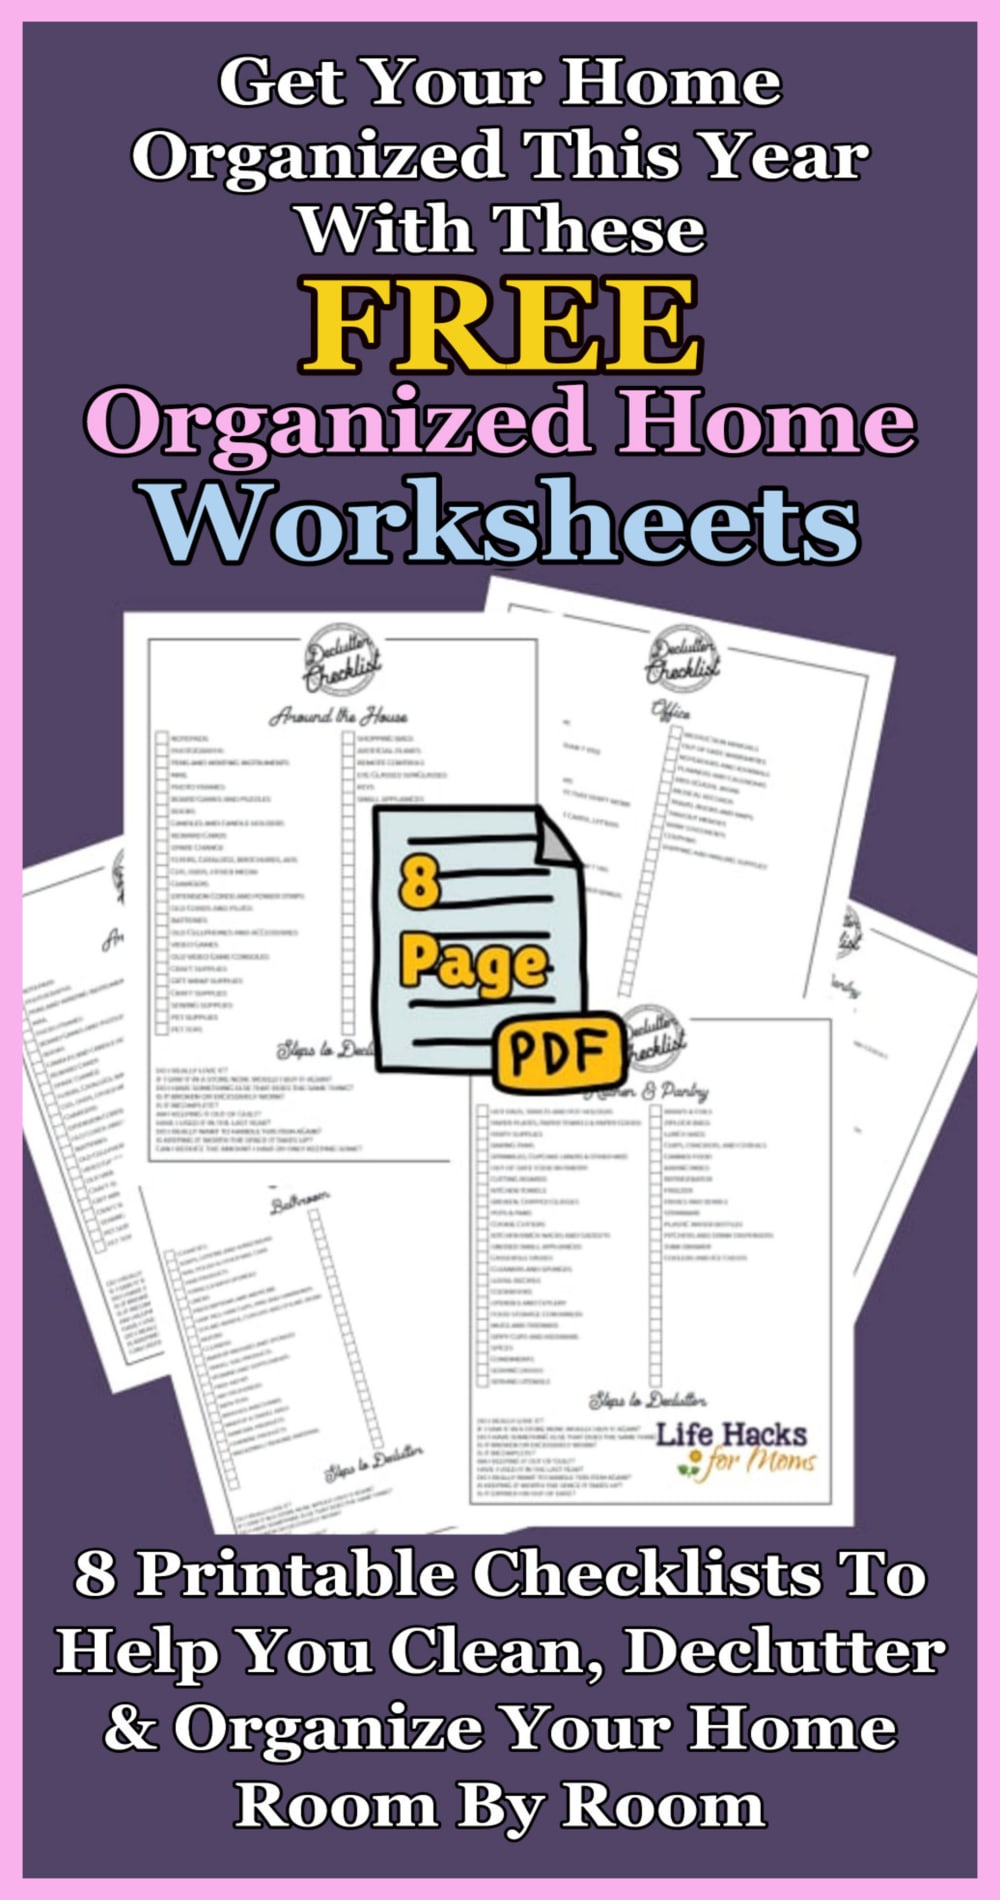 organized home worksheets to print